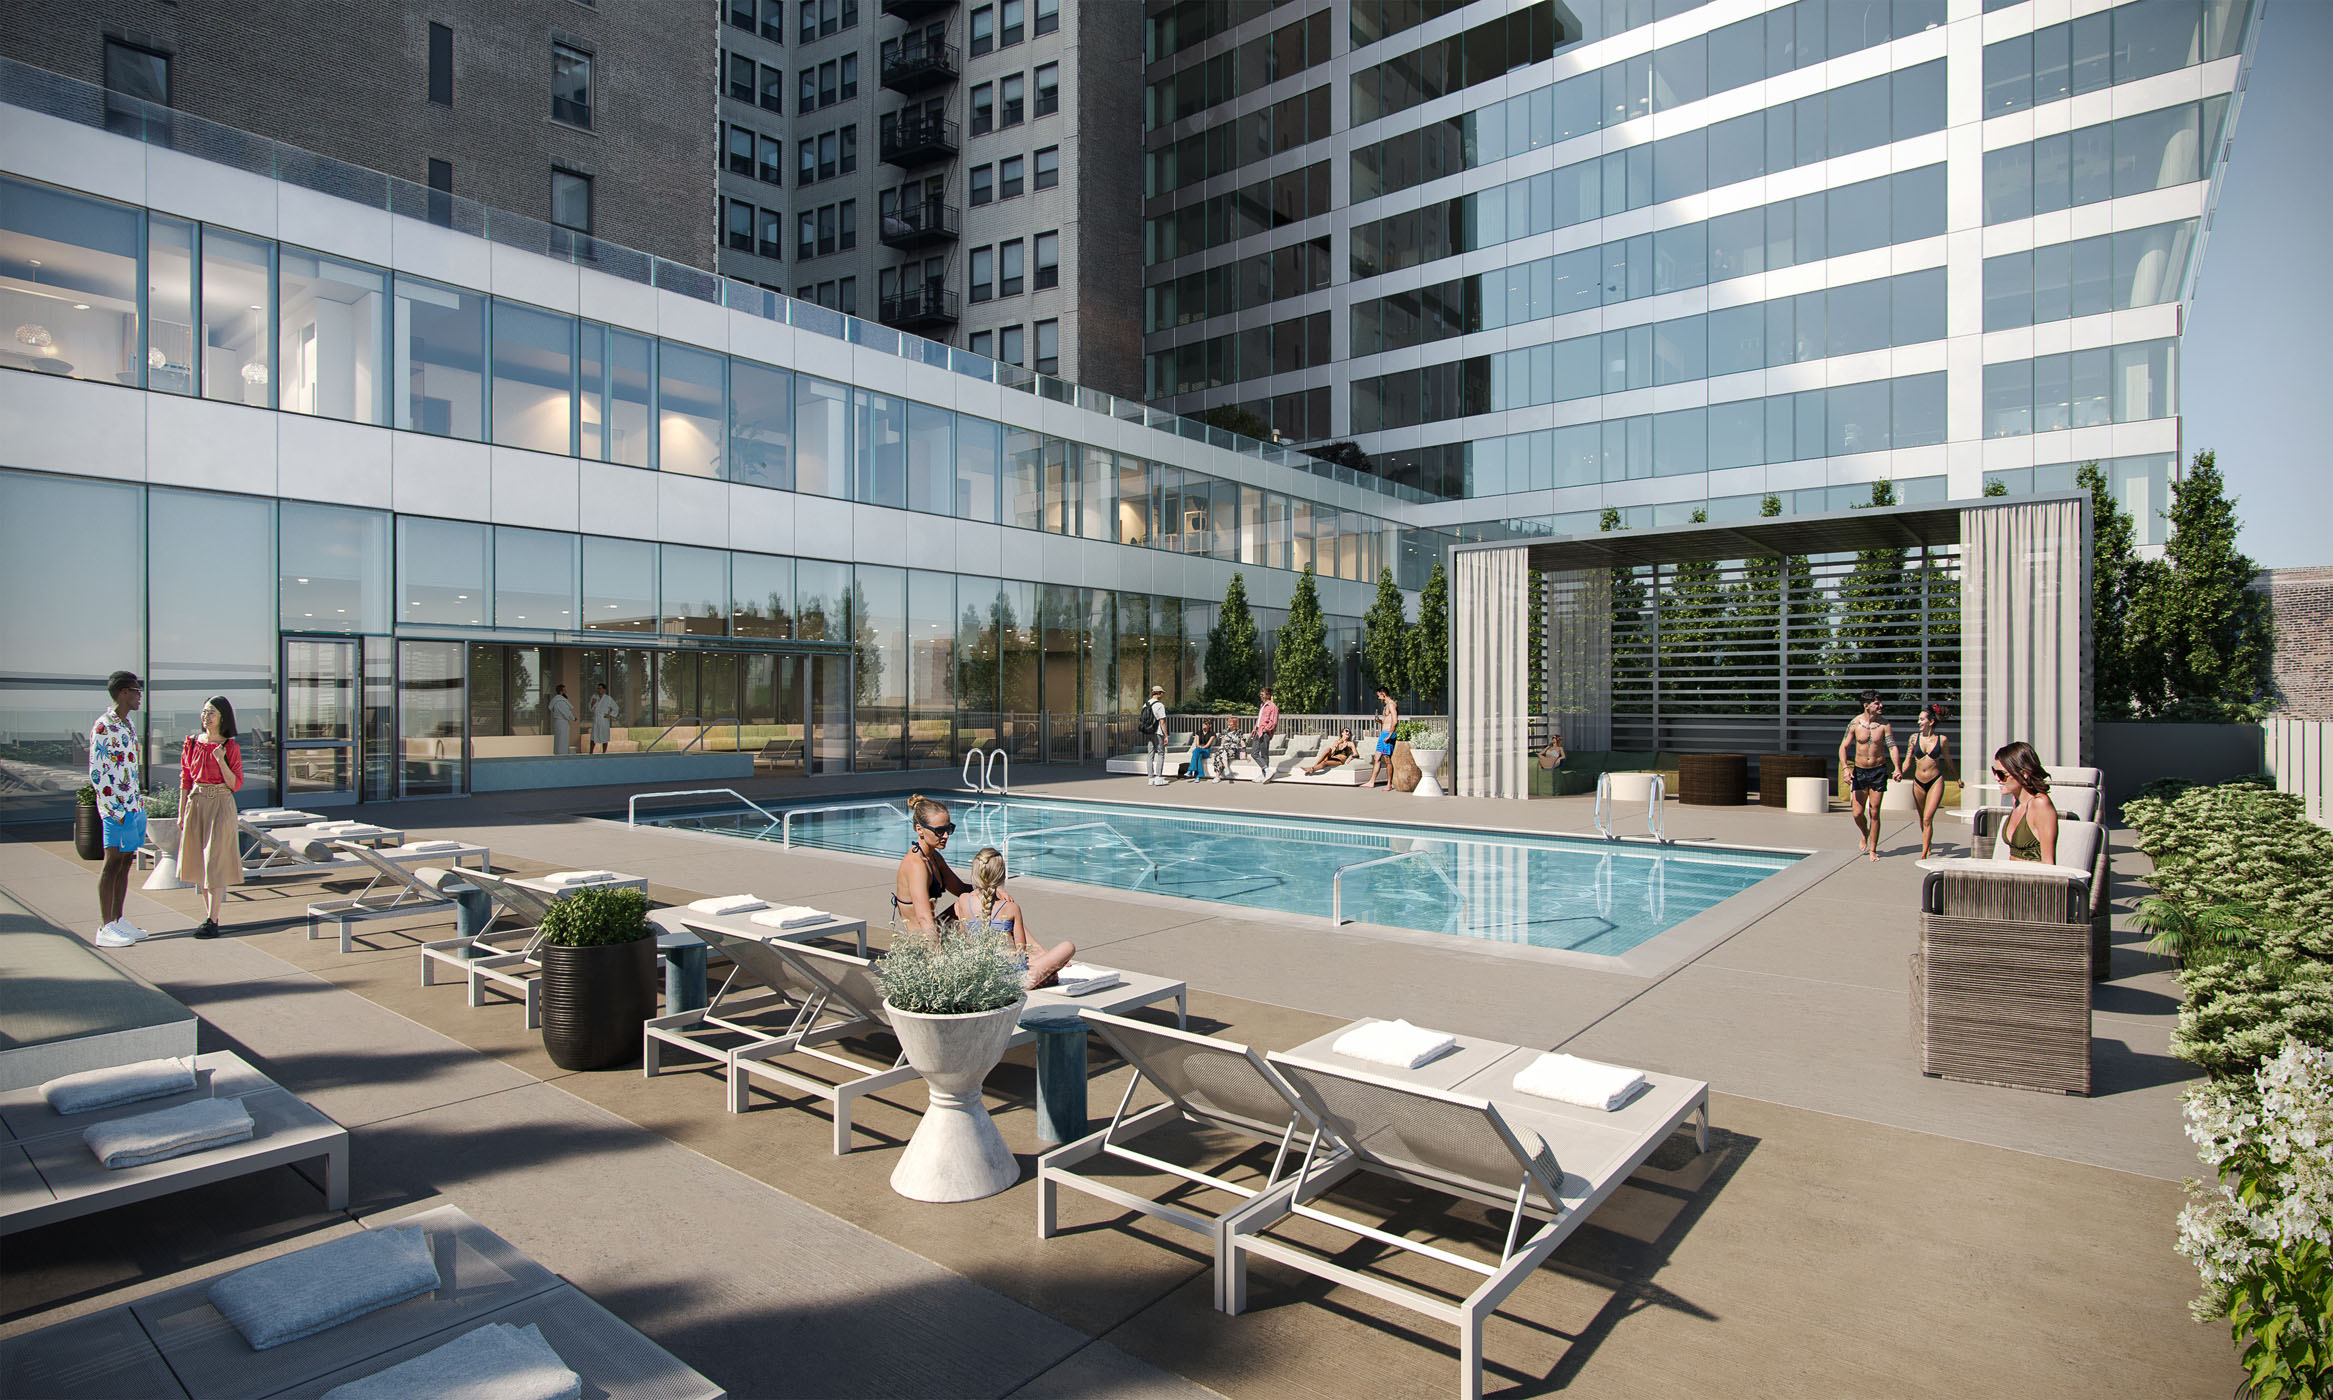 1000M outdoor pool and sundeck rendering with people lounging